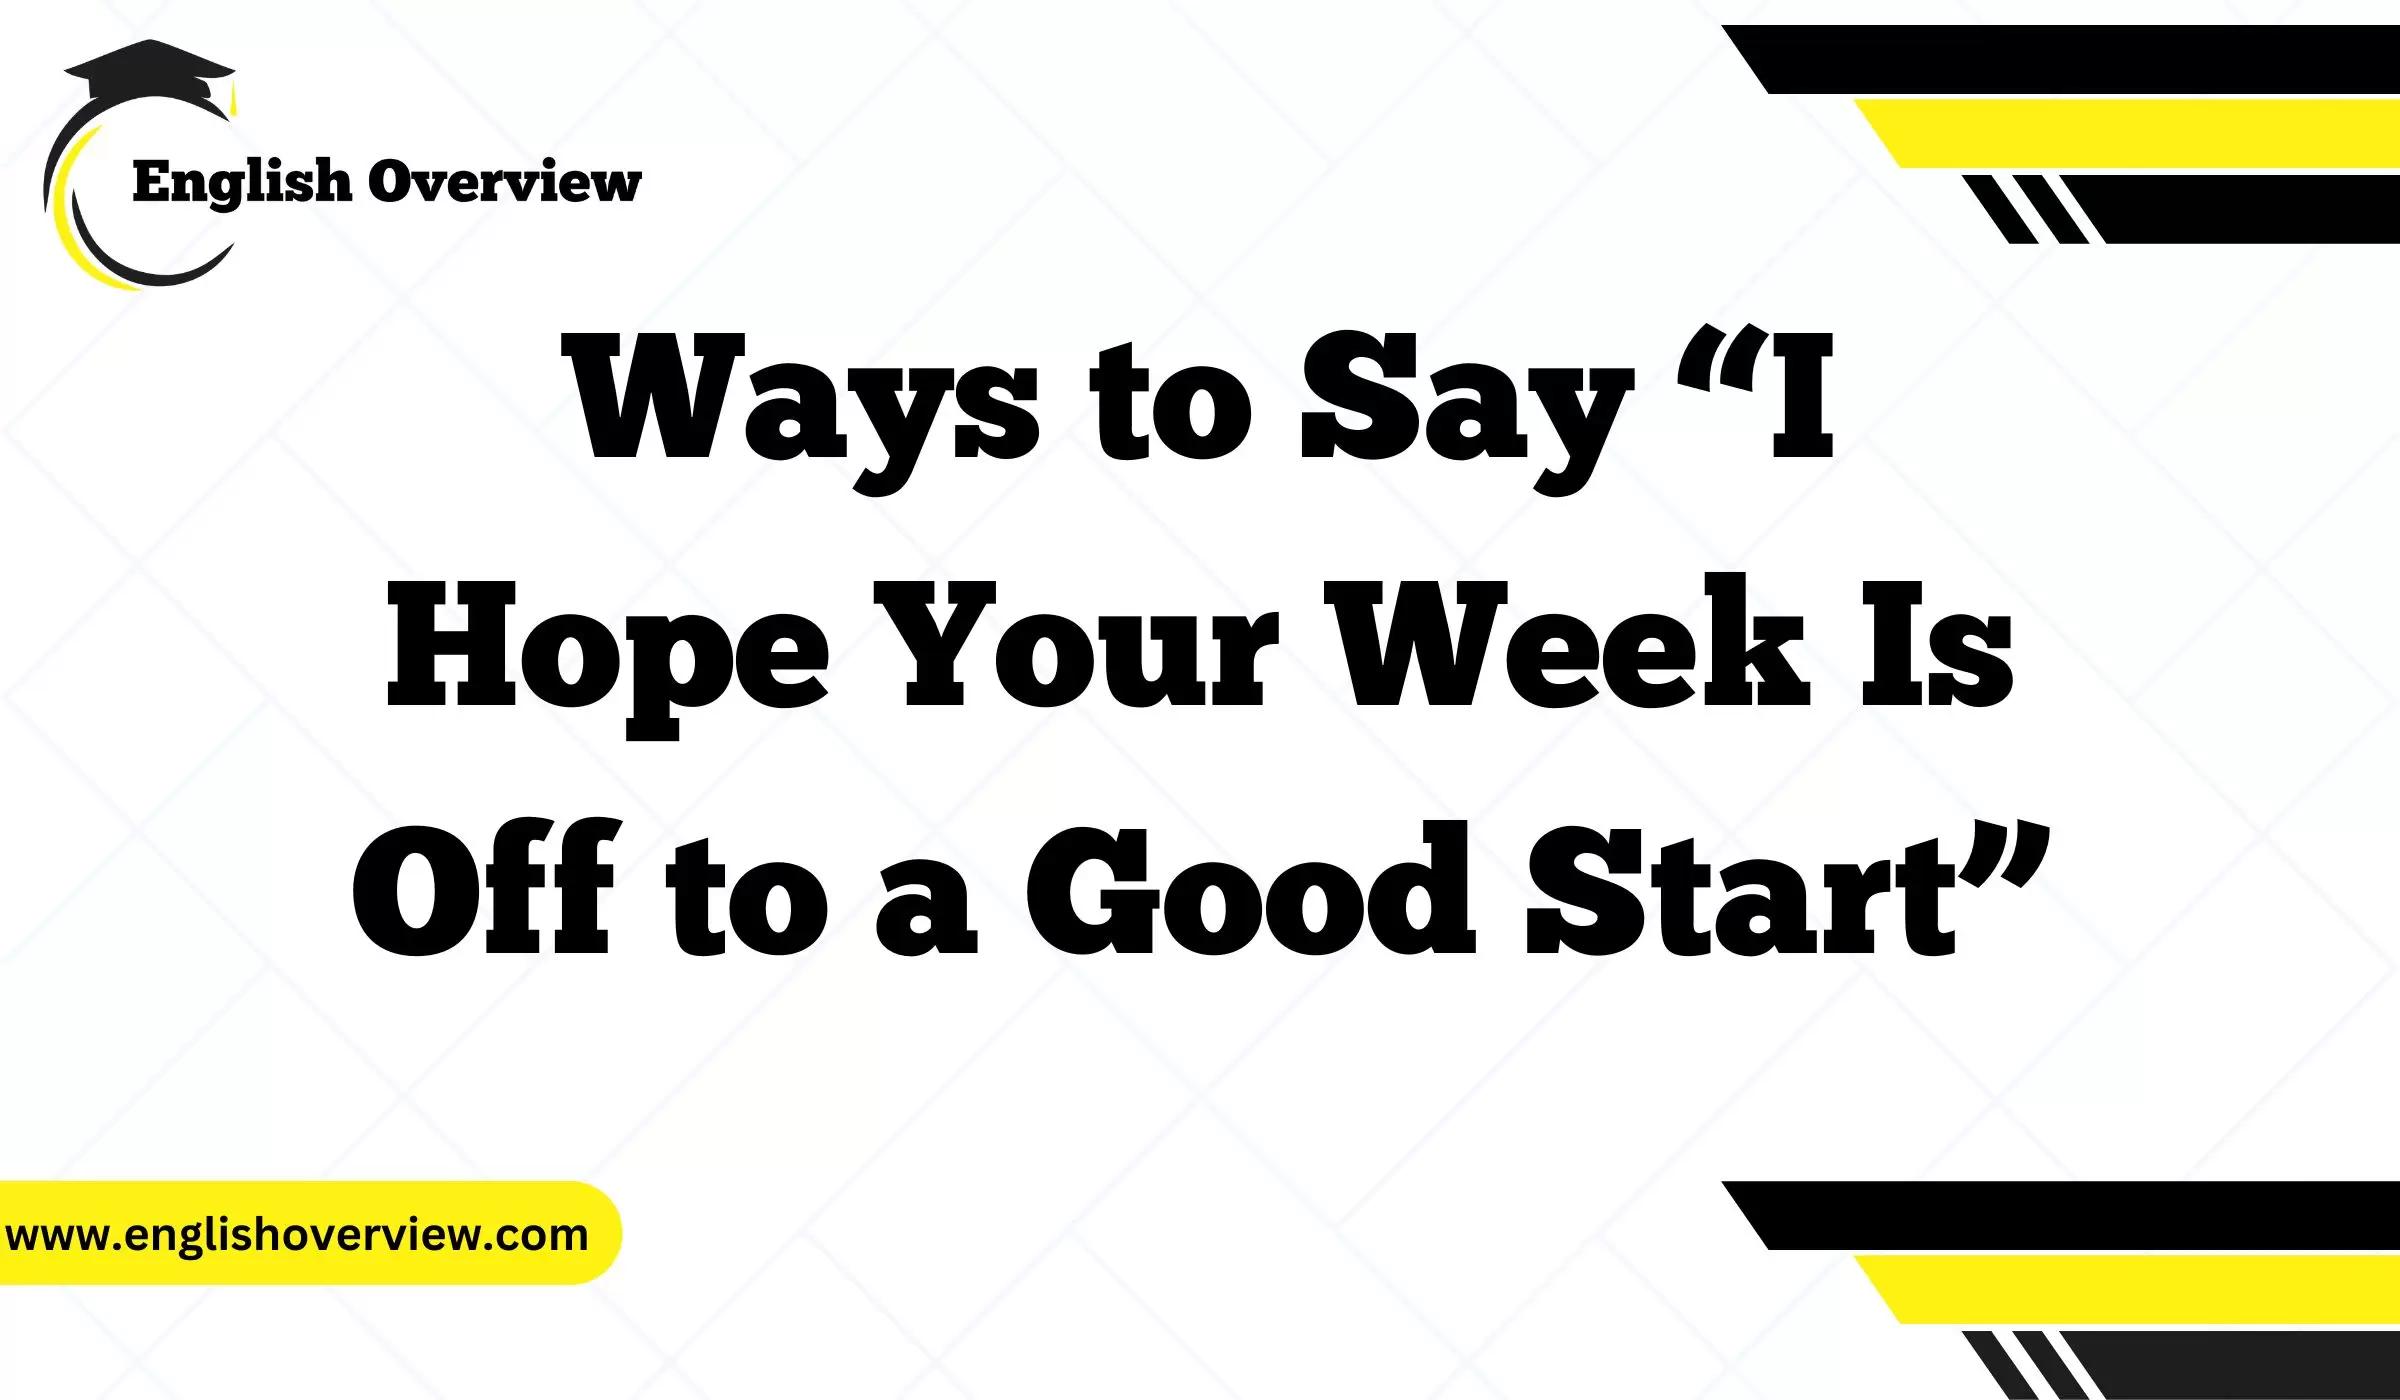 Ways to Say “I Hope Your Week Is Off to a Good Start”